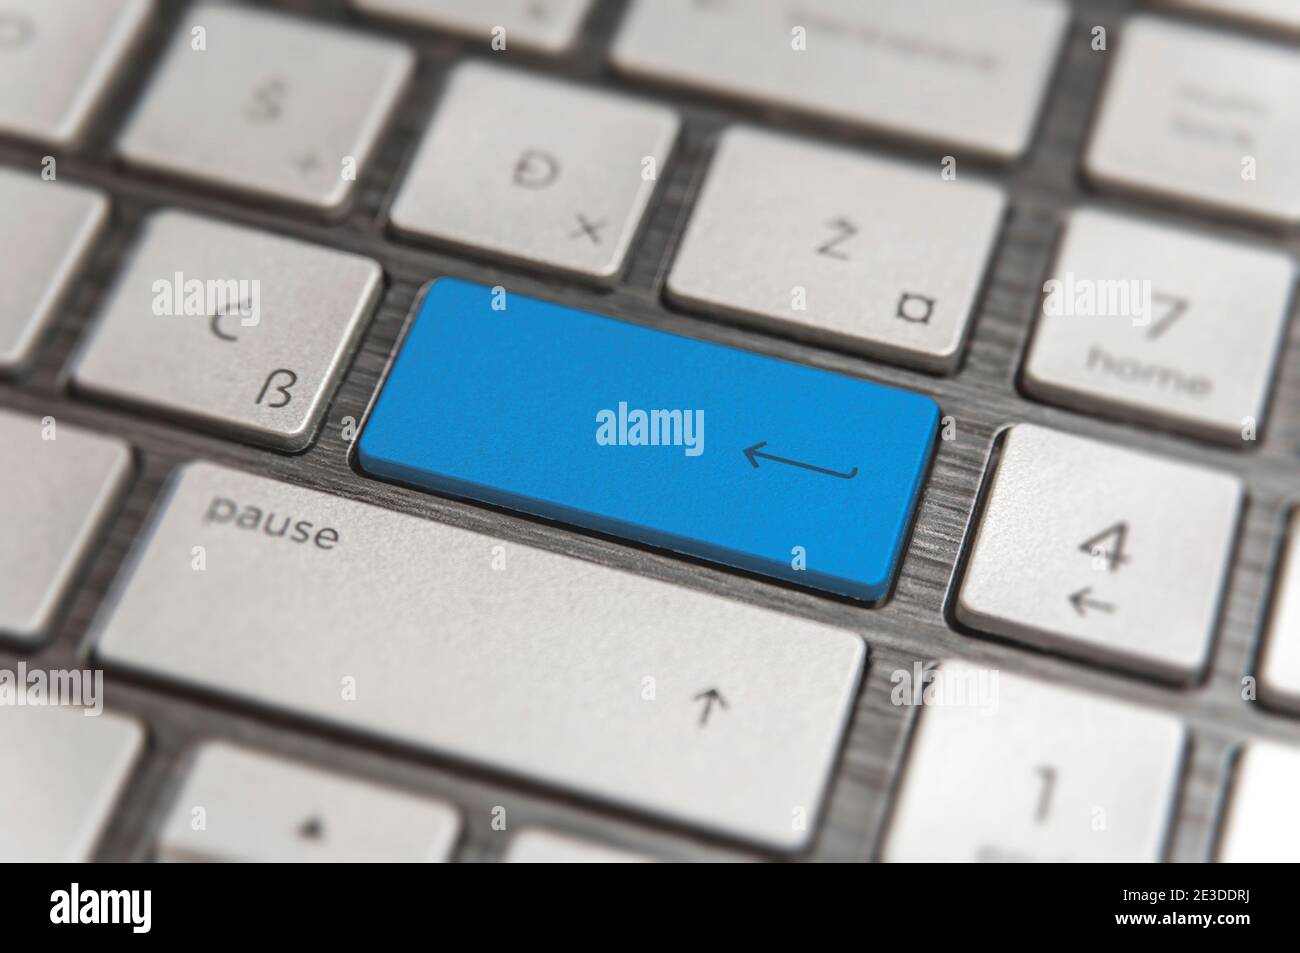 Keyboard with blue blank Enter button modern pc text communication board Stock Photo